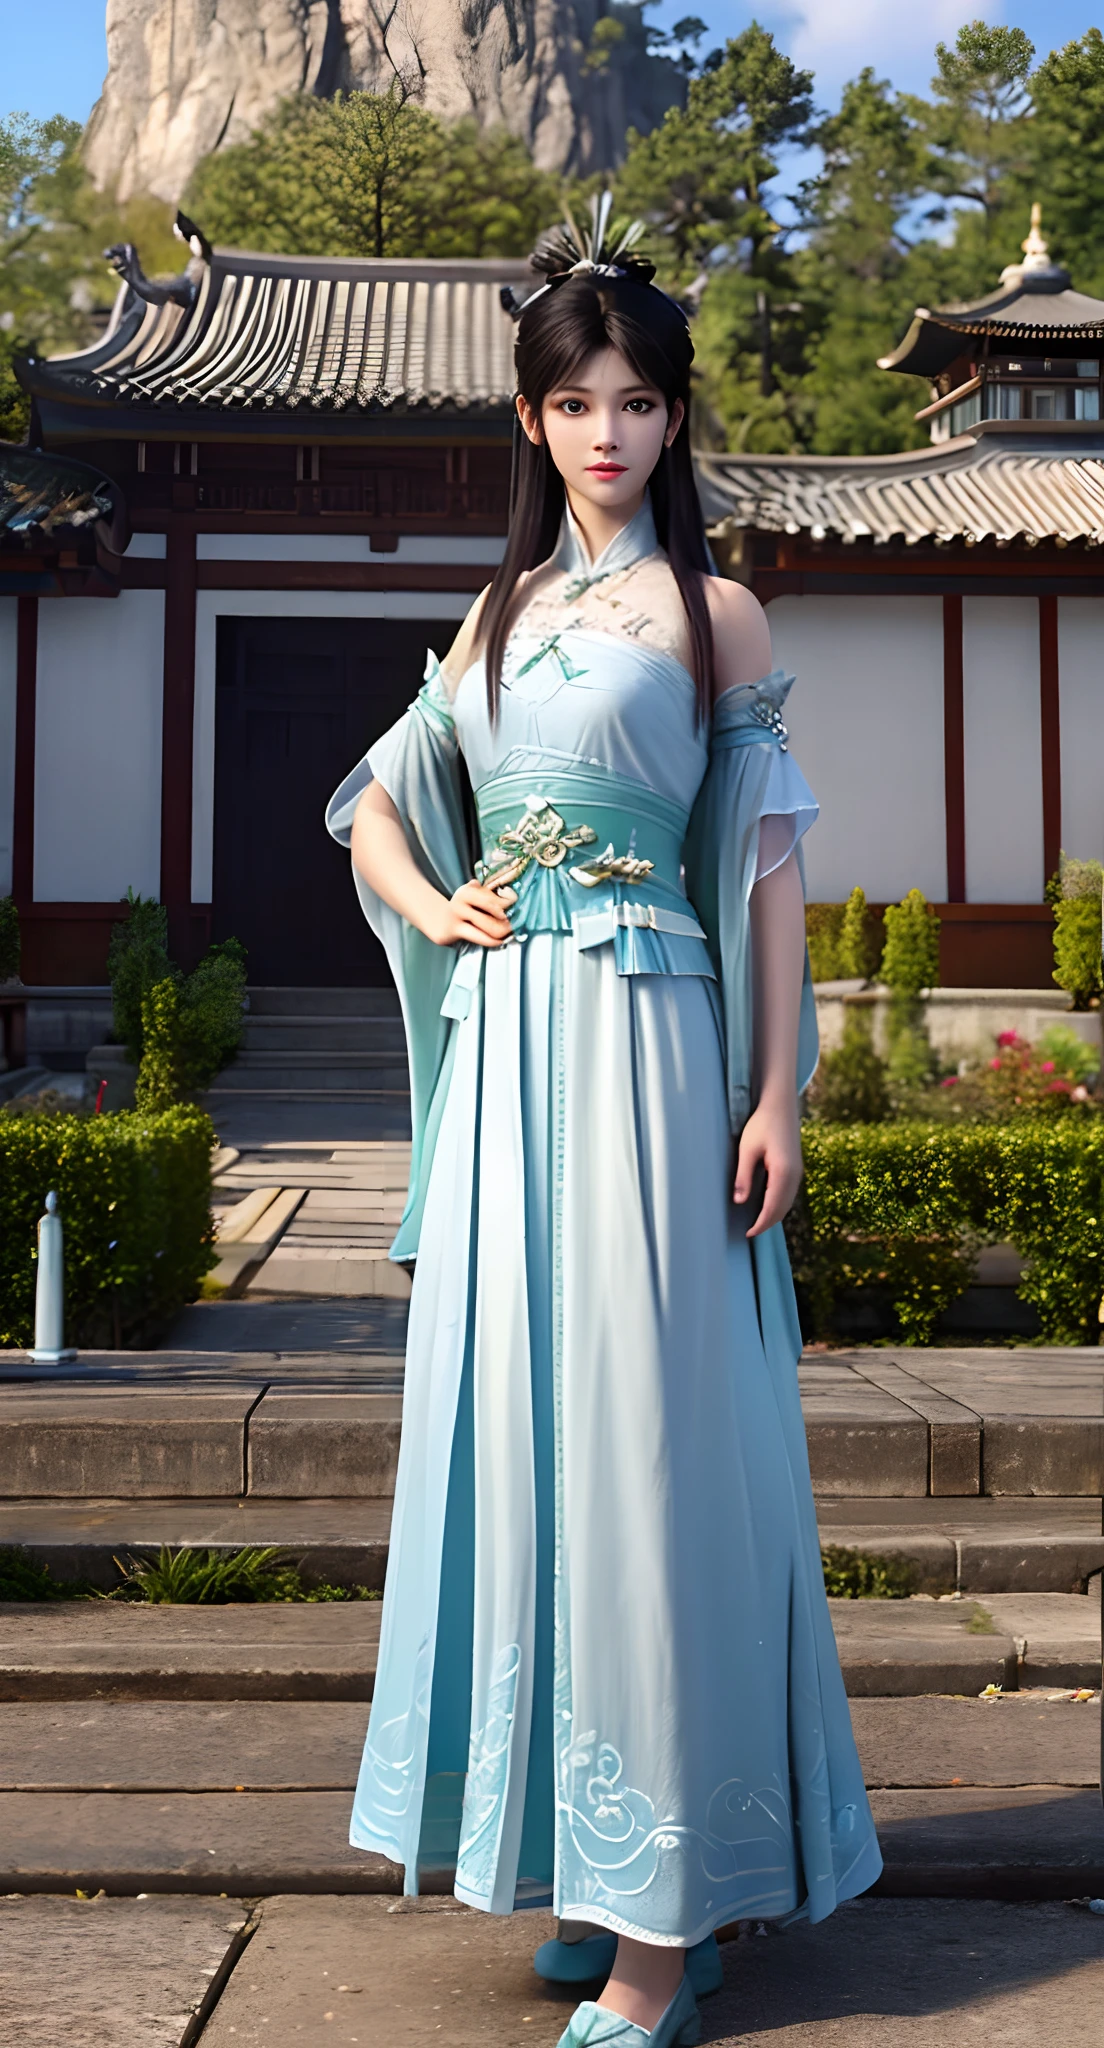 Araki in a blue and white dress stands on the grass, full-body xianxia, Inspired by Lan Ying, Inspired by Qiu Ying, inspired by Du Qiong, inspired by Li Mei-shu, Inspired by Li Tang, inspired by Leng Mei, Palace ， A girl in Hanfu, Chinese costume, heise jinyao